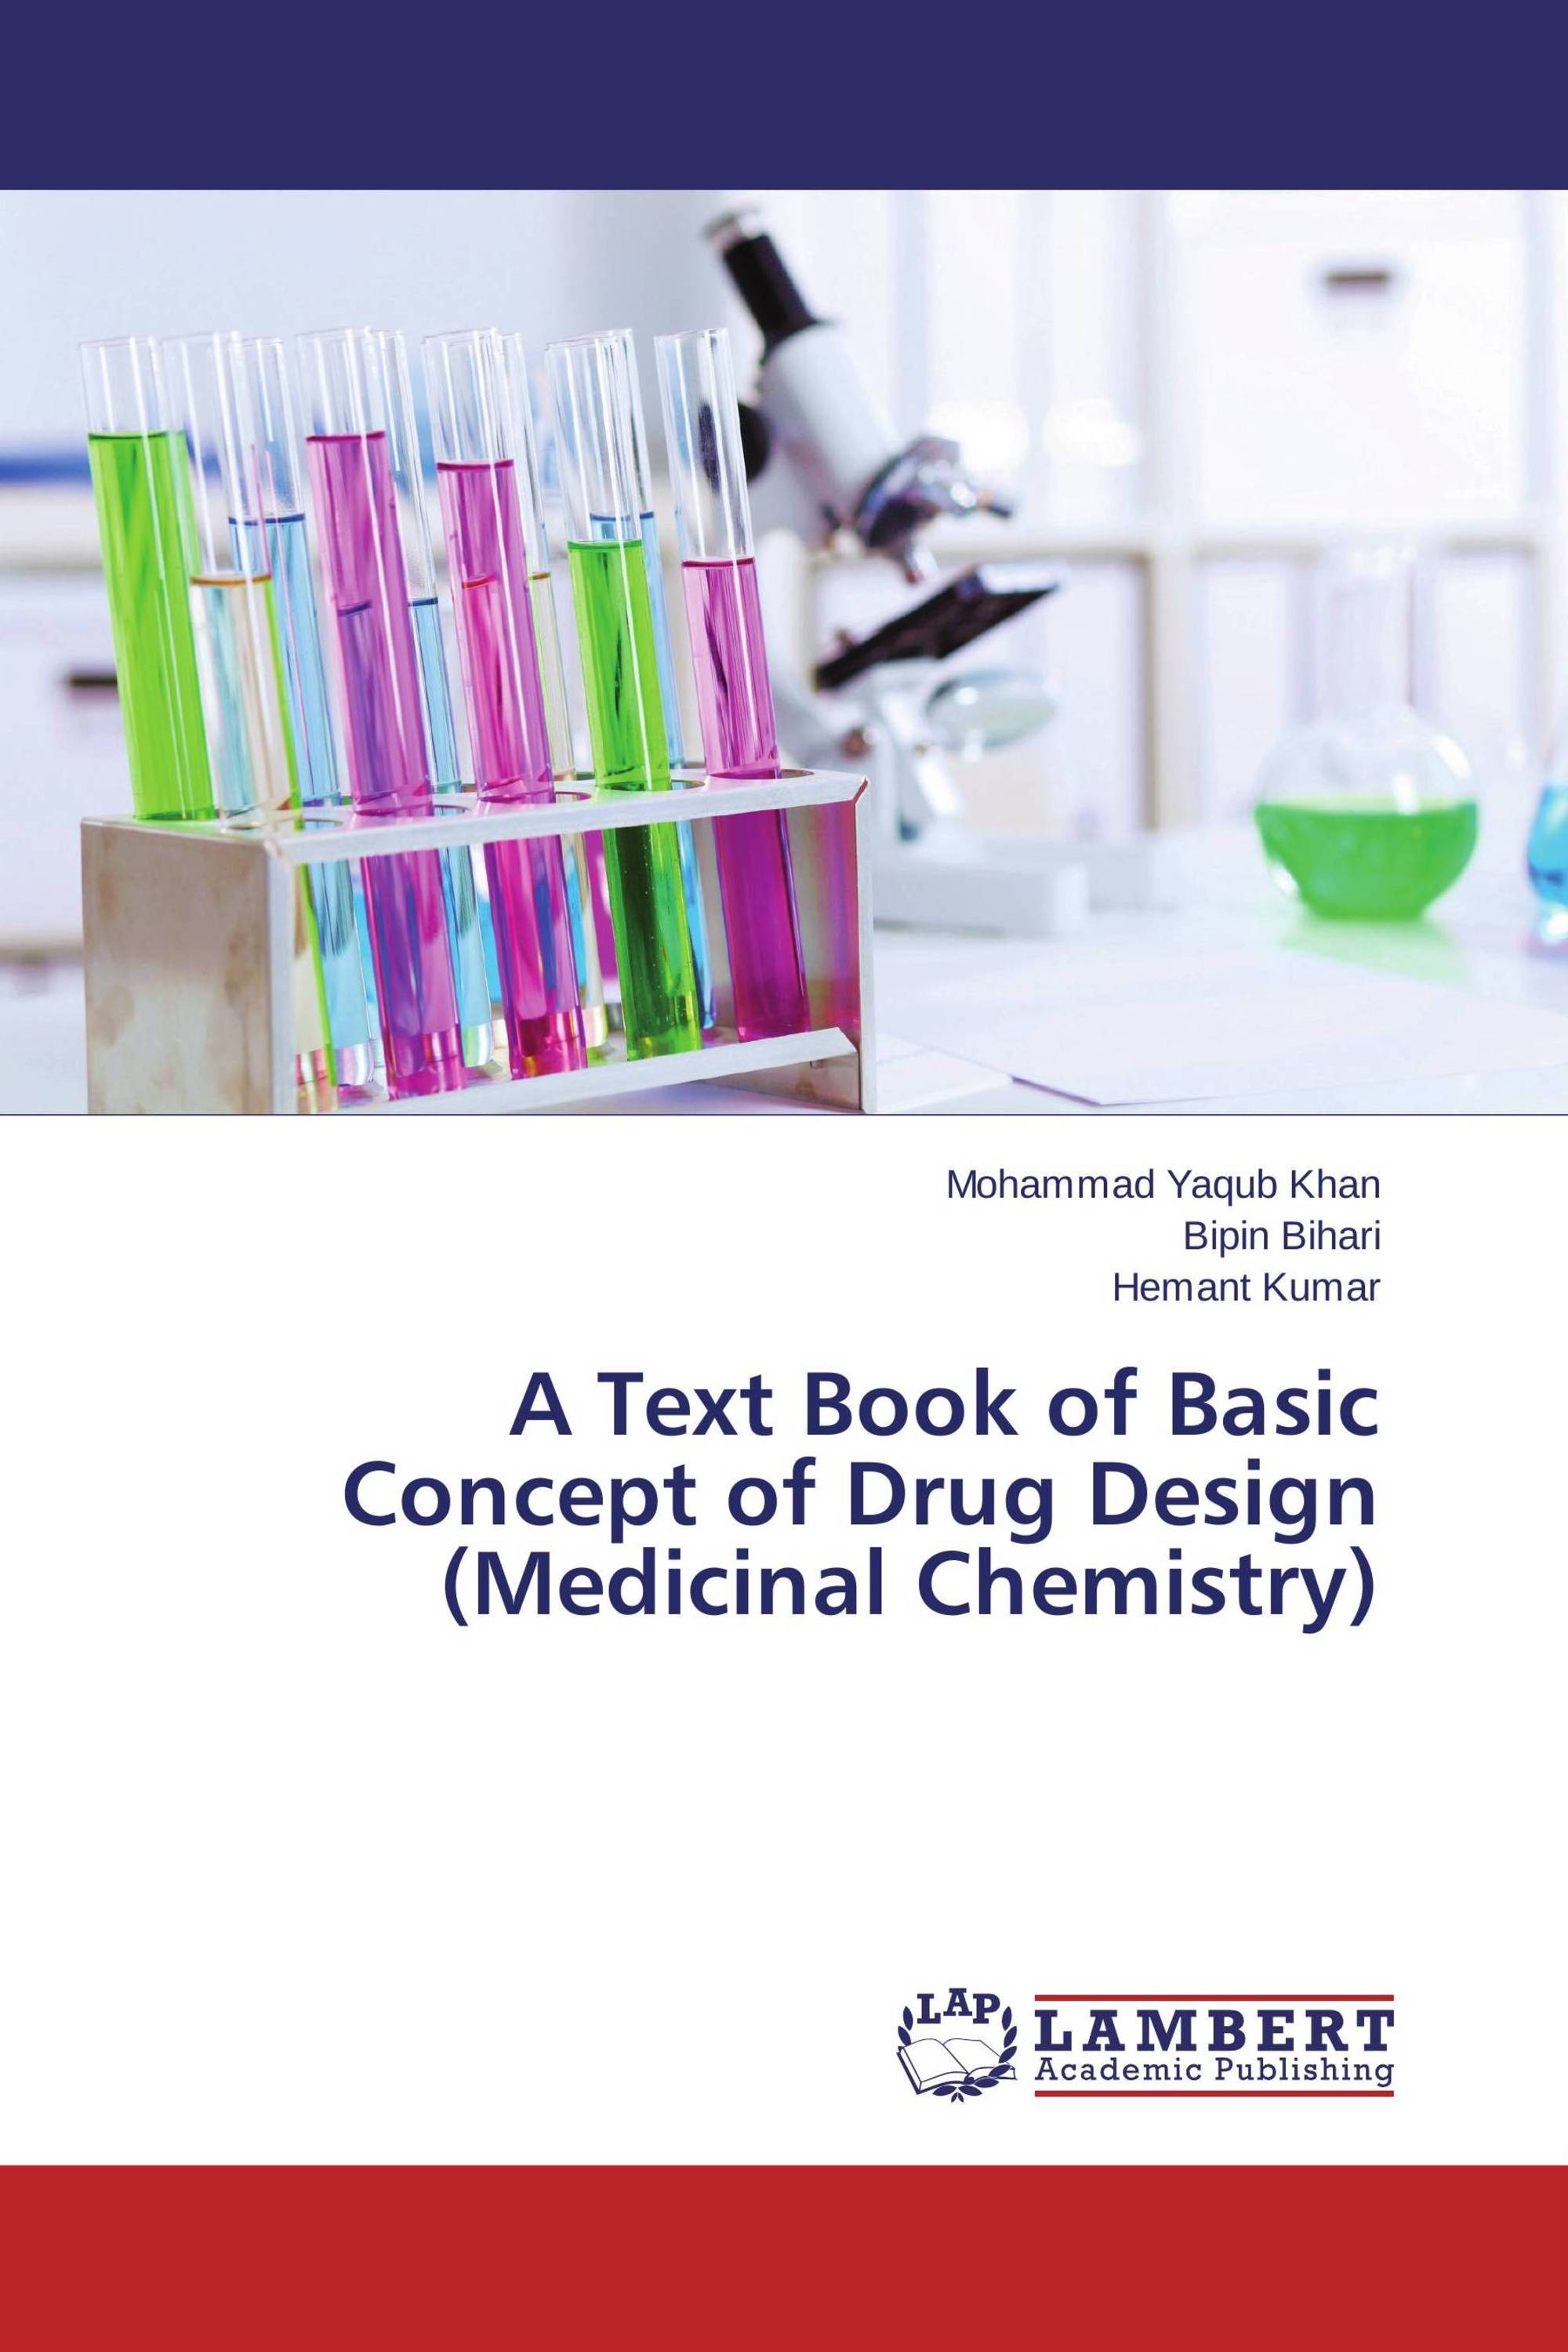 research topics in medicinal chemistry